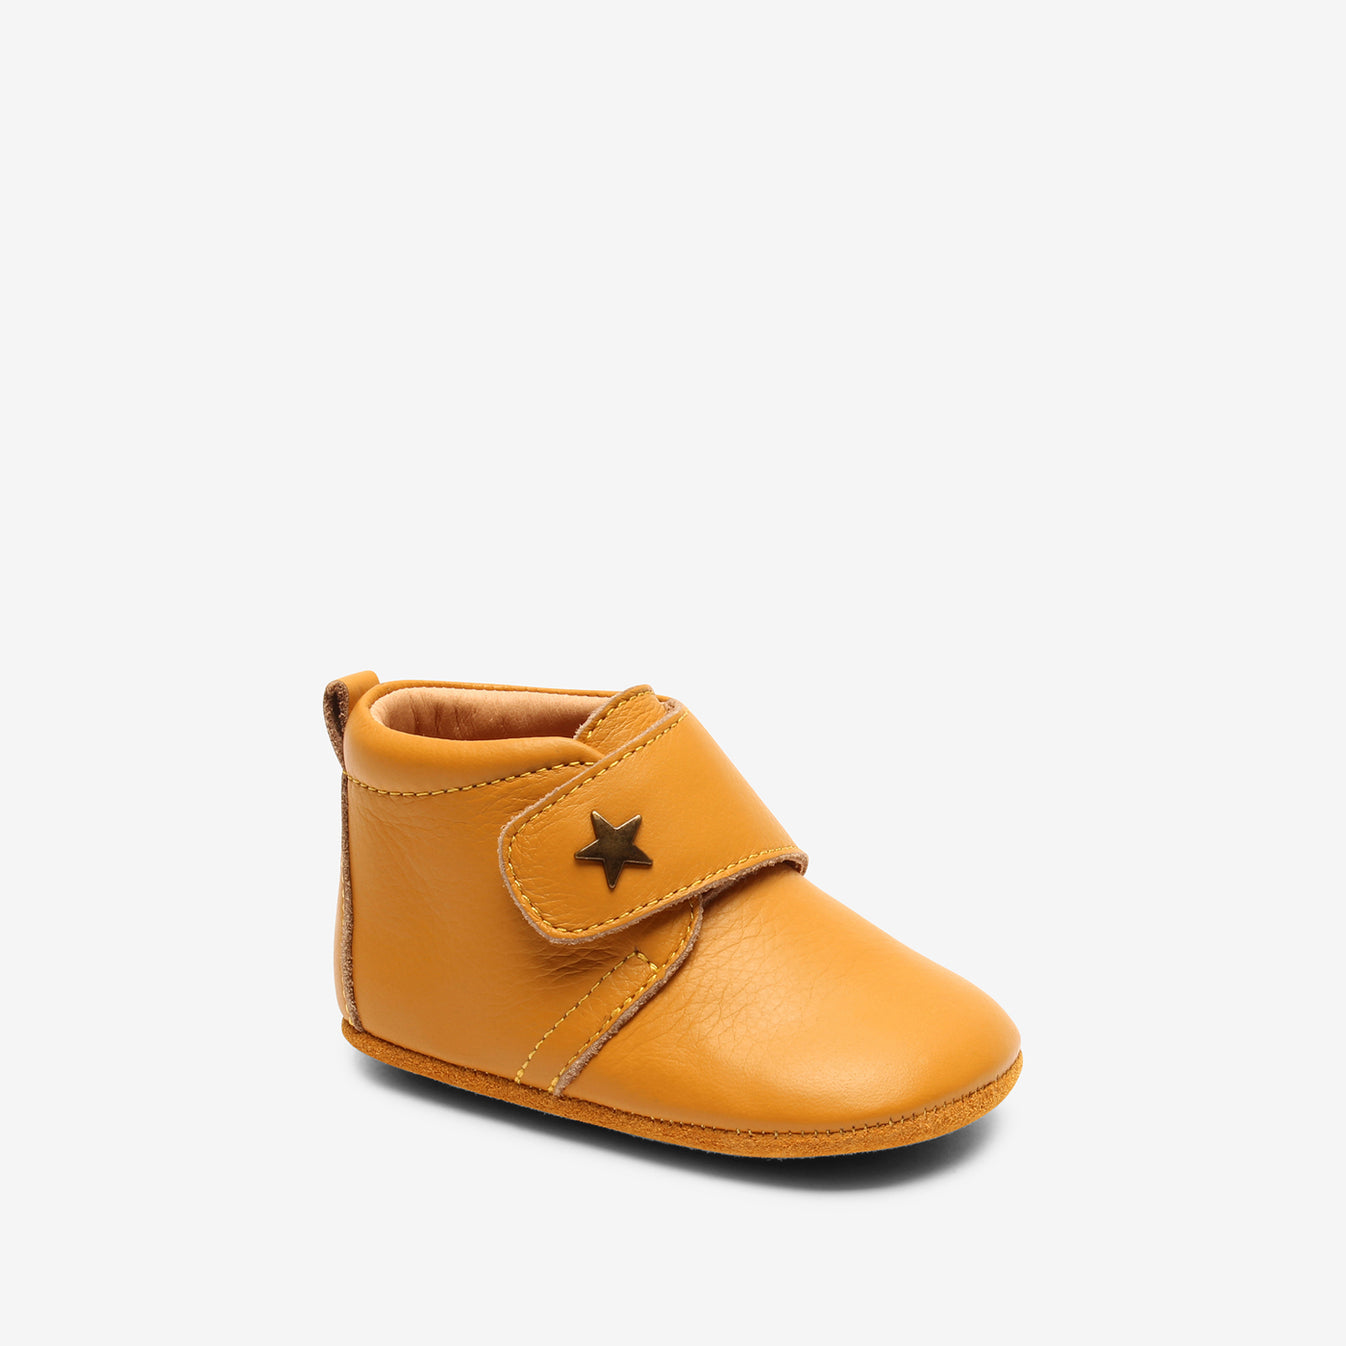 Chaussons en cuir Star | Moutarde